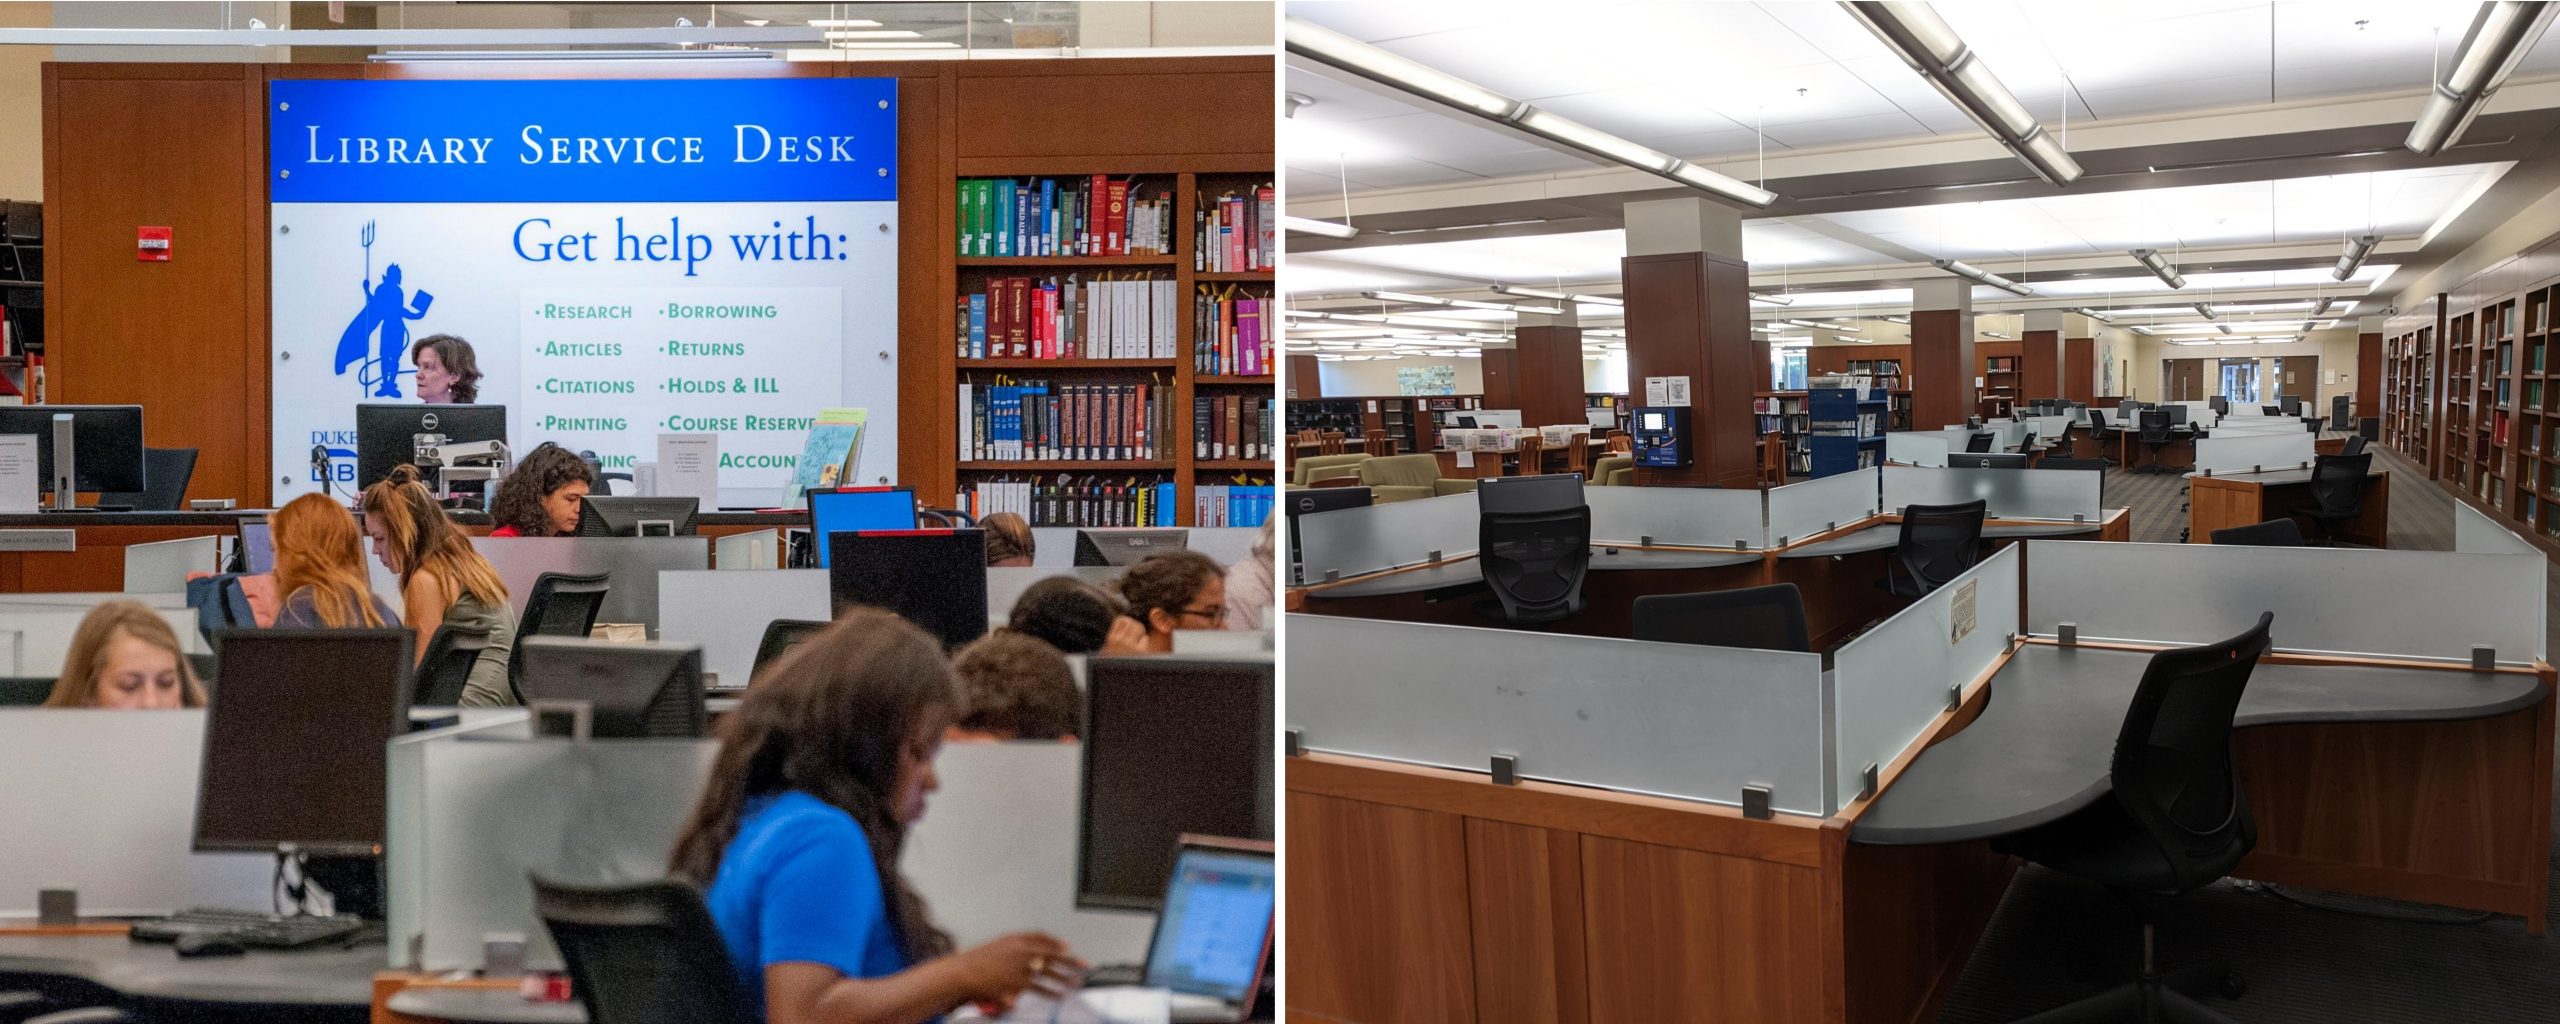 Library service desk Perkins Library before and after